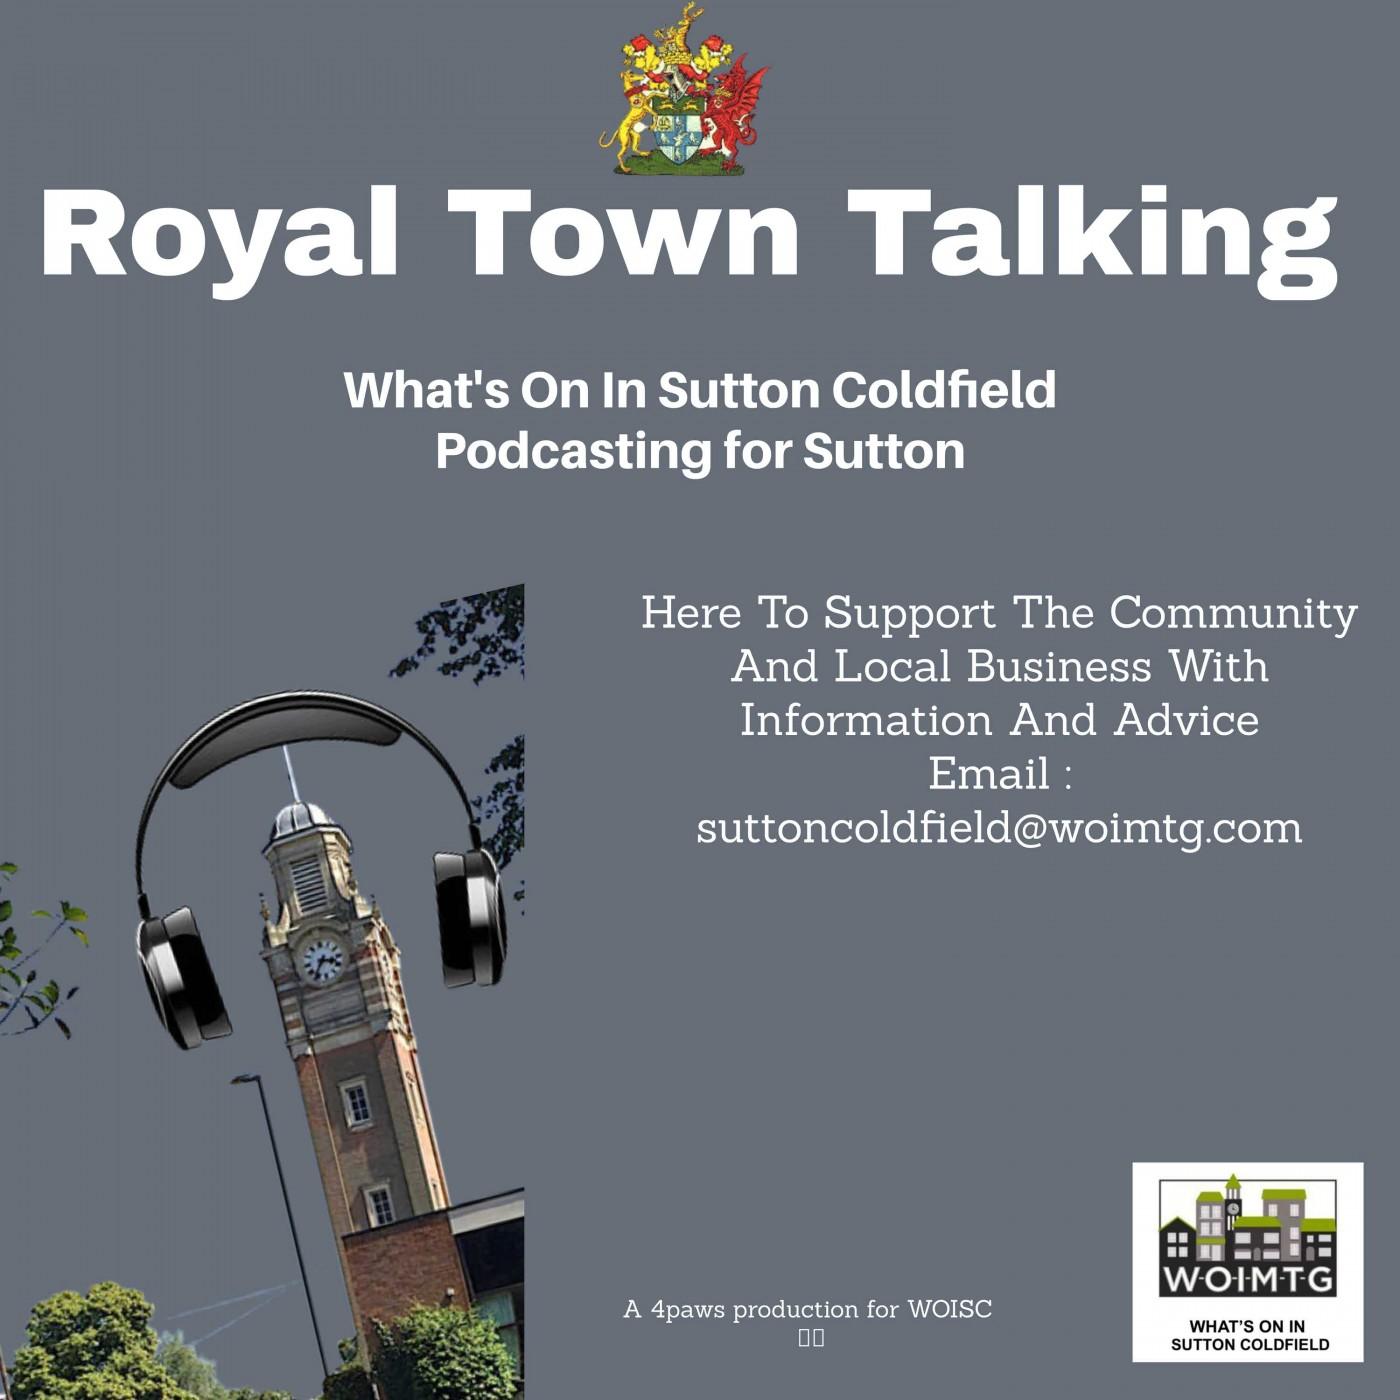 Royal Town Talking - What's On In Sutton Coldfield Podcasting For Sutton